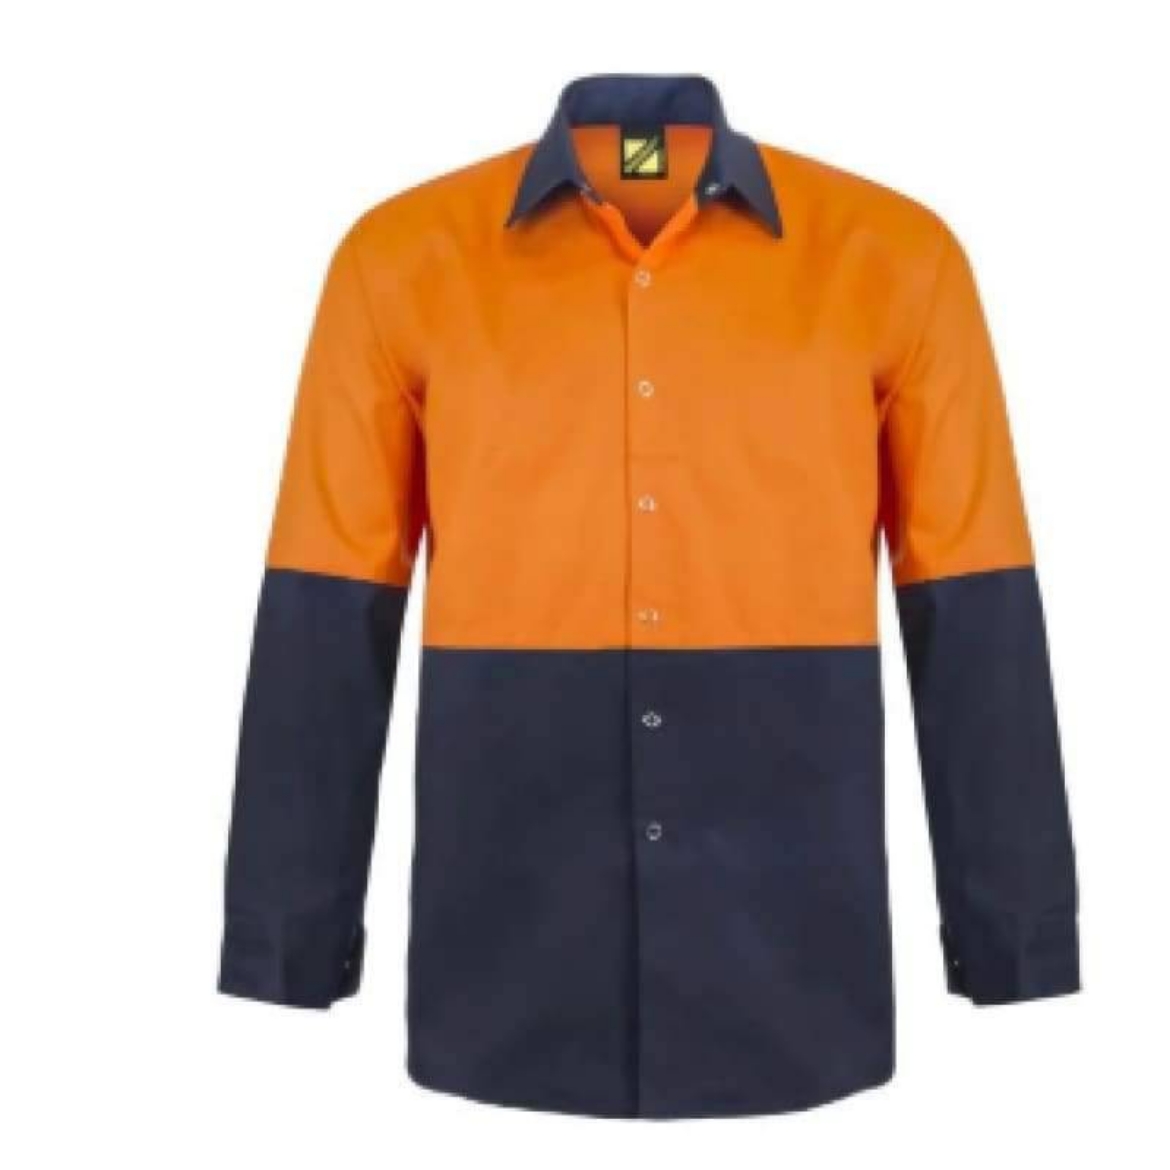 Picture of WorkCraft Long Sleeve Shirt. Cotton Drill with Press Studs (No Pockets). Orange/Navy - size 7XL